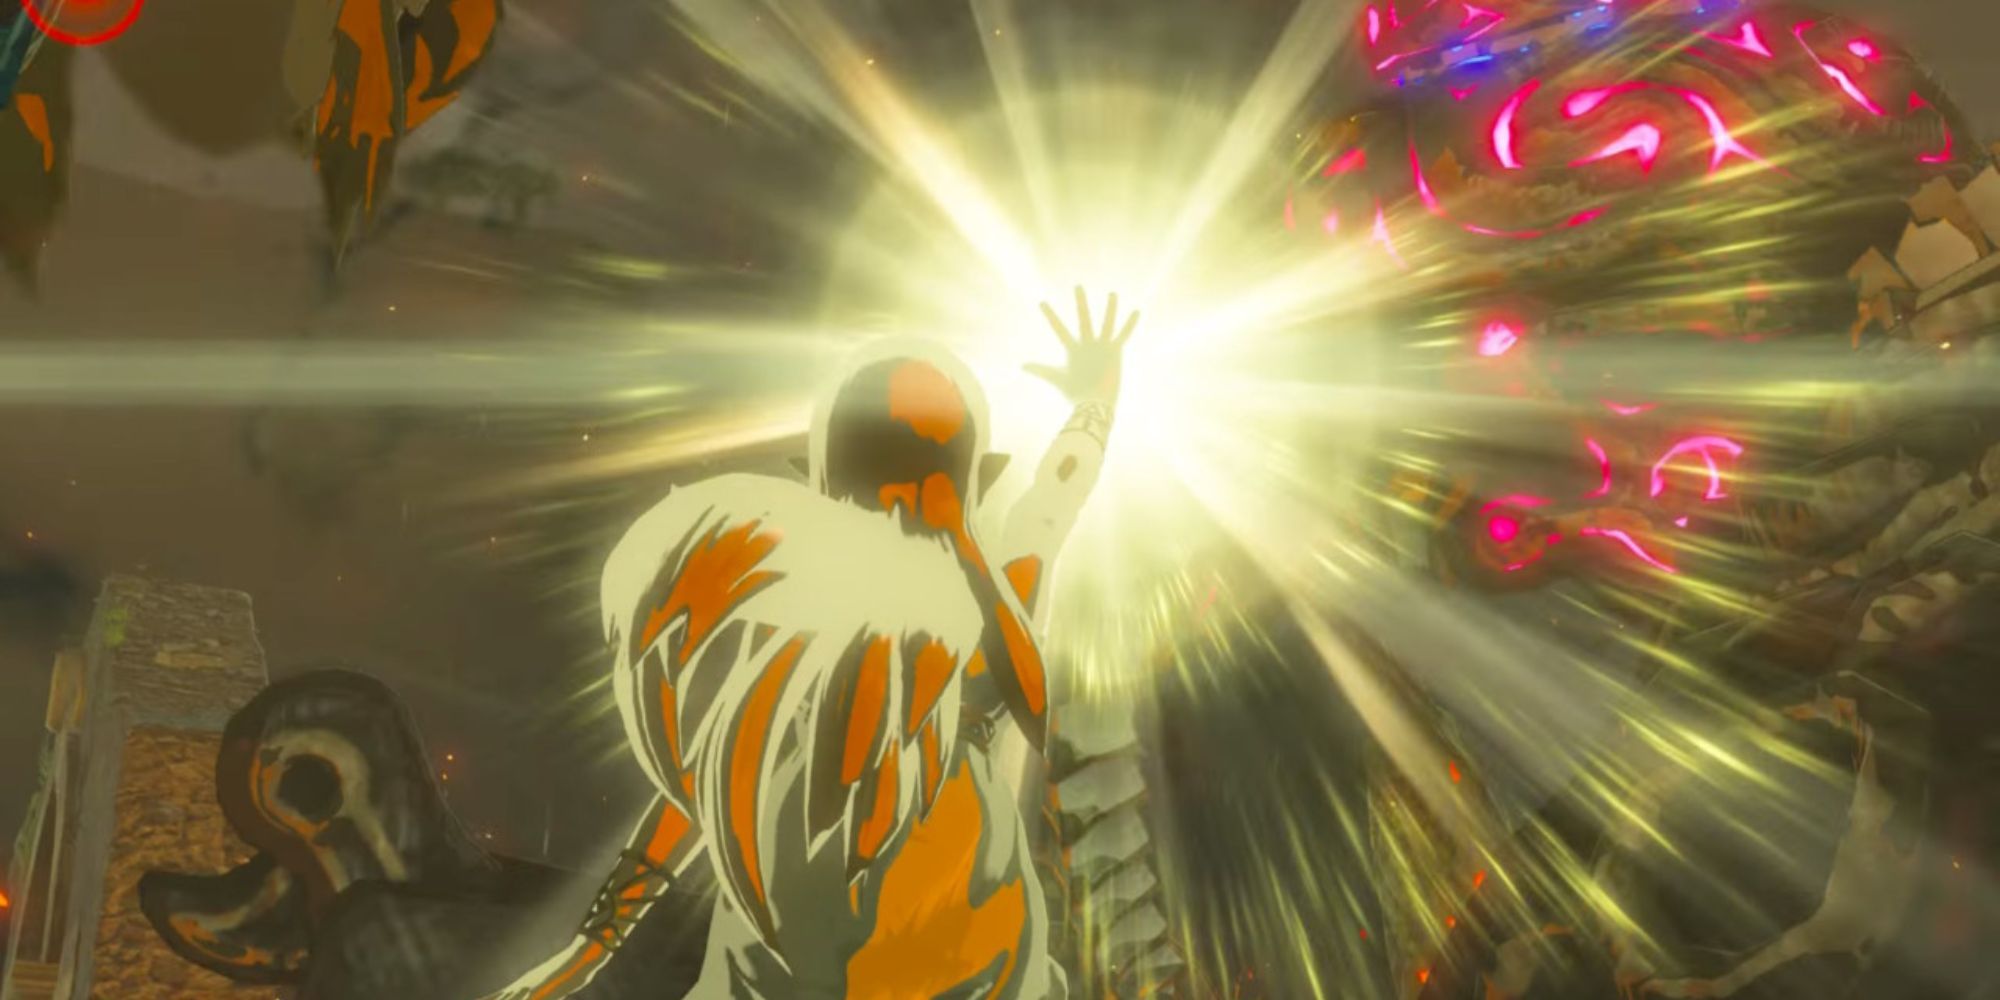 Zelda uses the power of the Triforce to defeat a swarm of Guardians